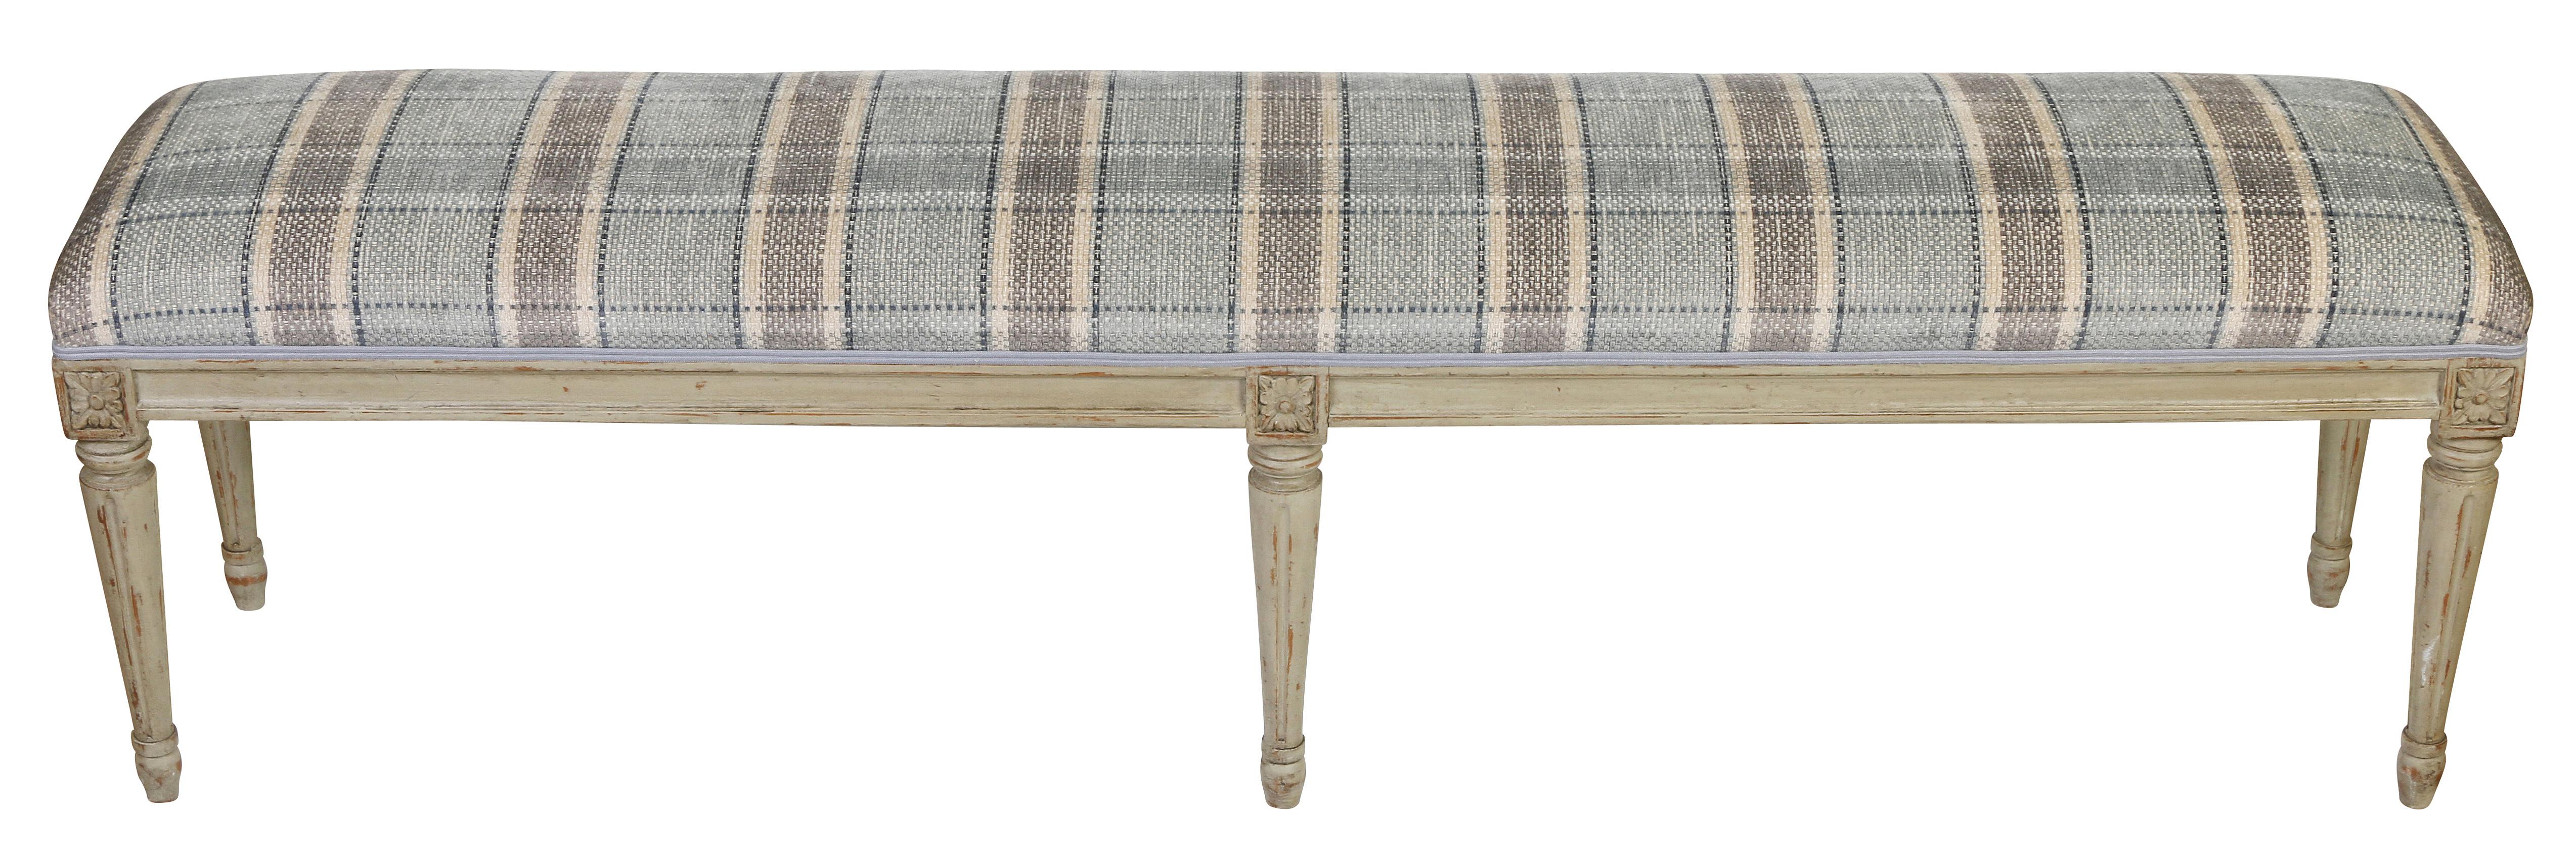 Perfect for the foot of a bed, this long bench has s grey painted finish. The legs are tapered and fluted, with the lovely carved die joins (block where. the legs meet the base of bench ) that are characteristic of the Louis XVI style. The bench is